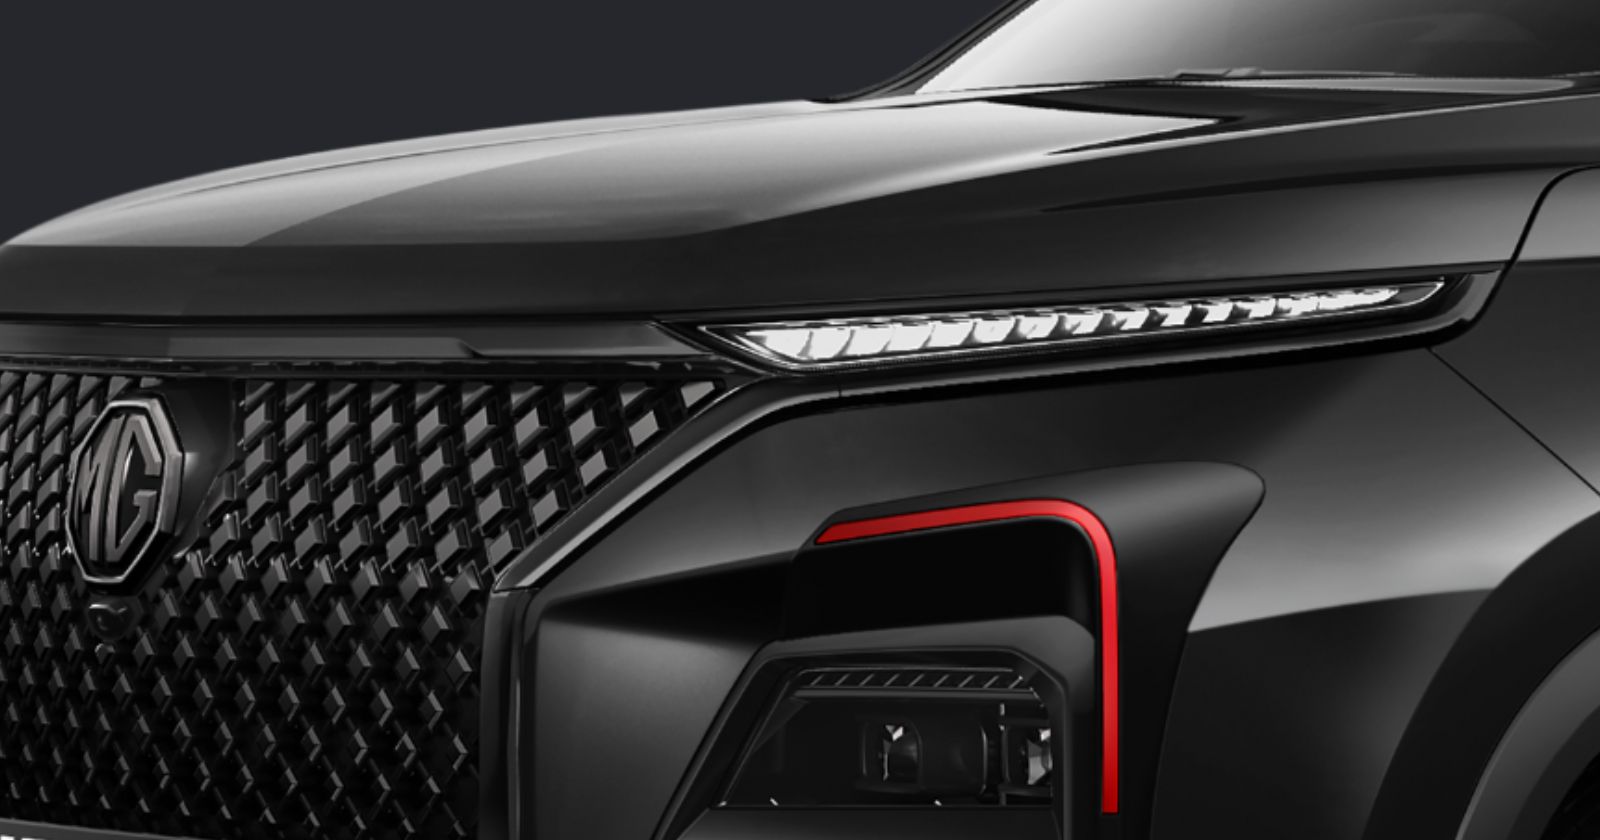 Introducing the New MG Hector Blackstorm Edition  A First Look at Its Unique Design Accents